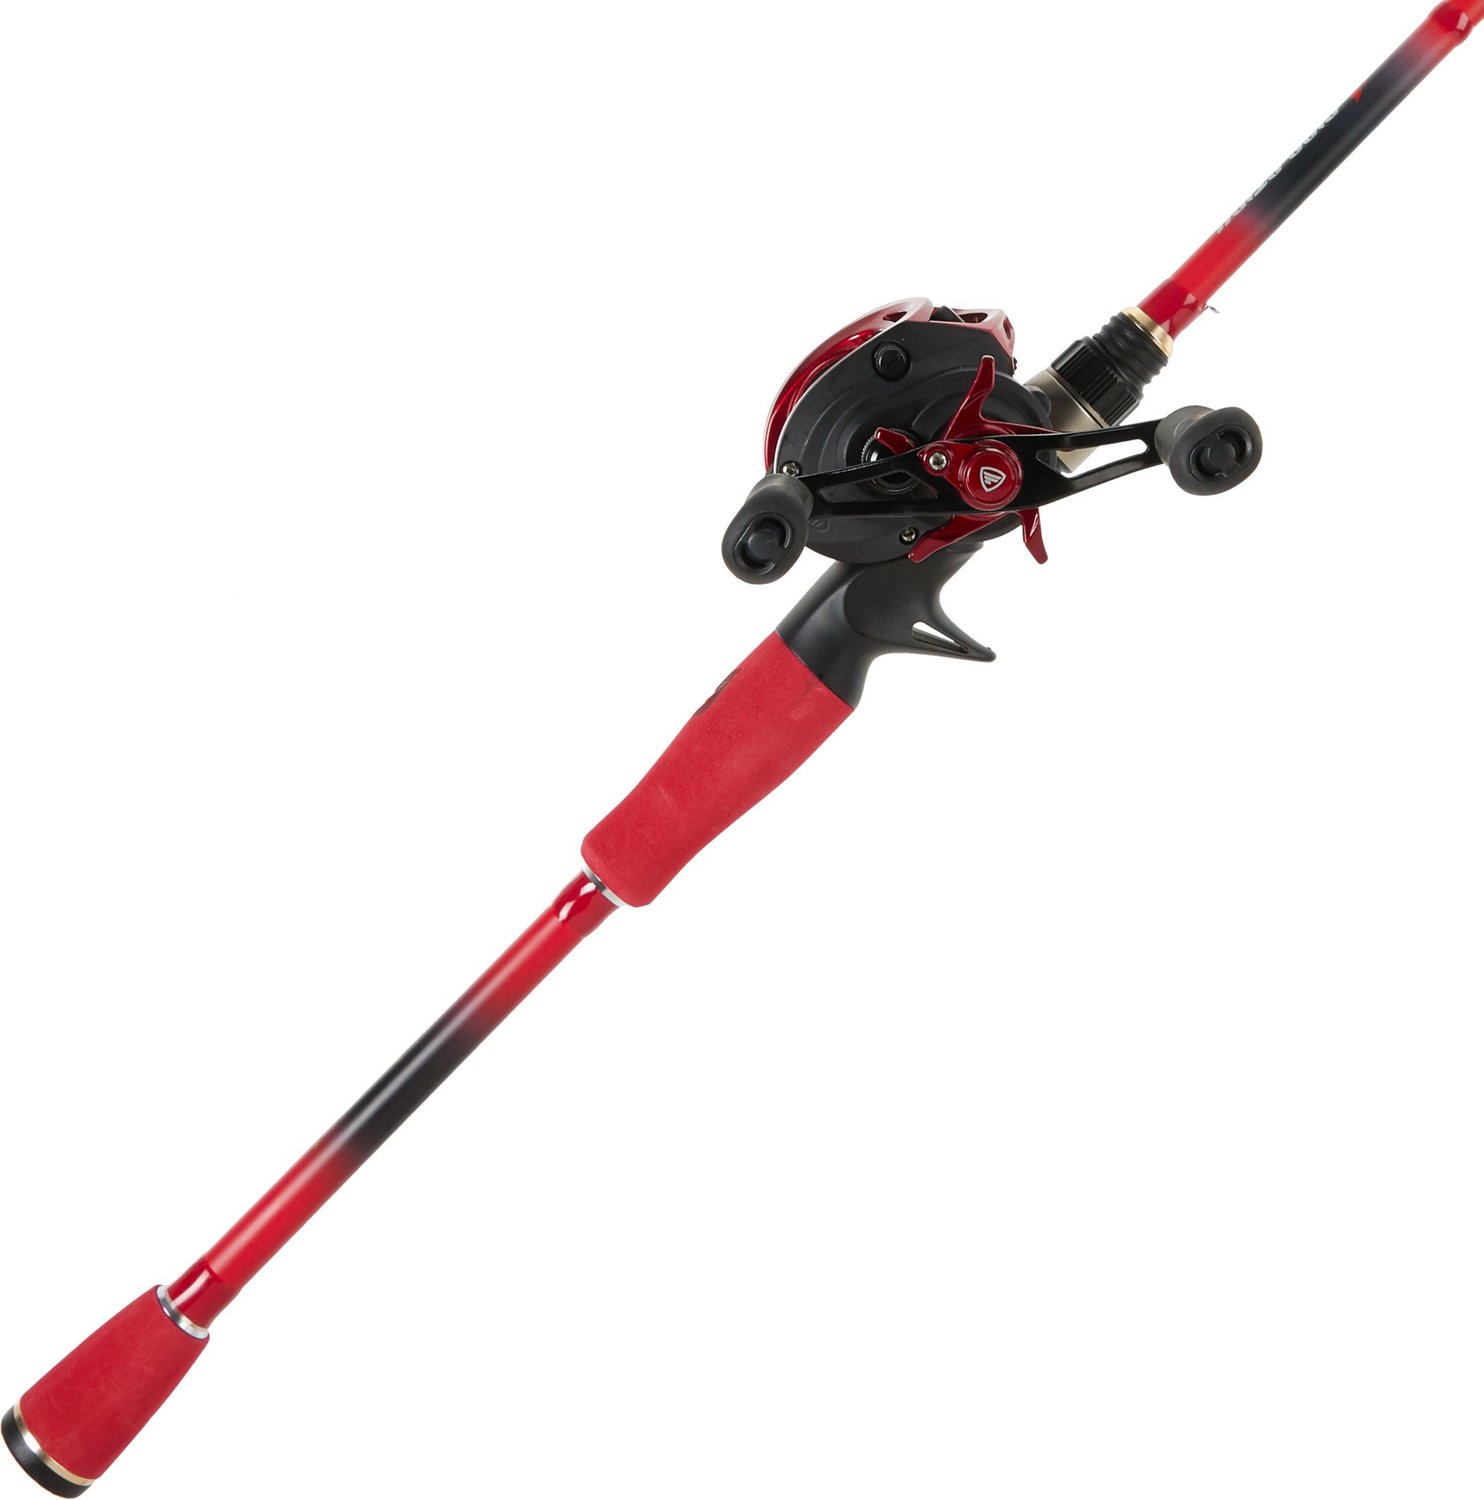 Powered by Favorite Fire 7 ft 2 in MH Baitcast Rod and Reel Combo